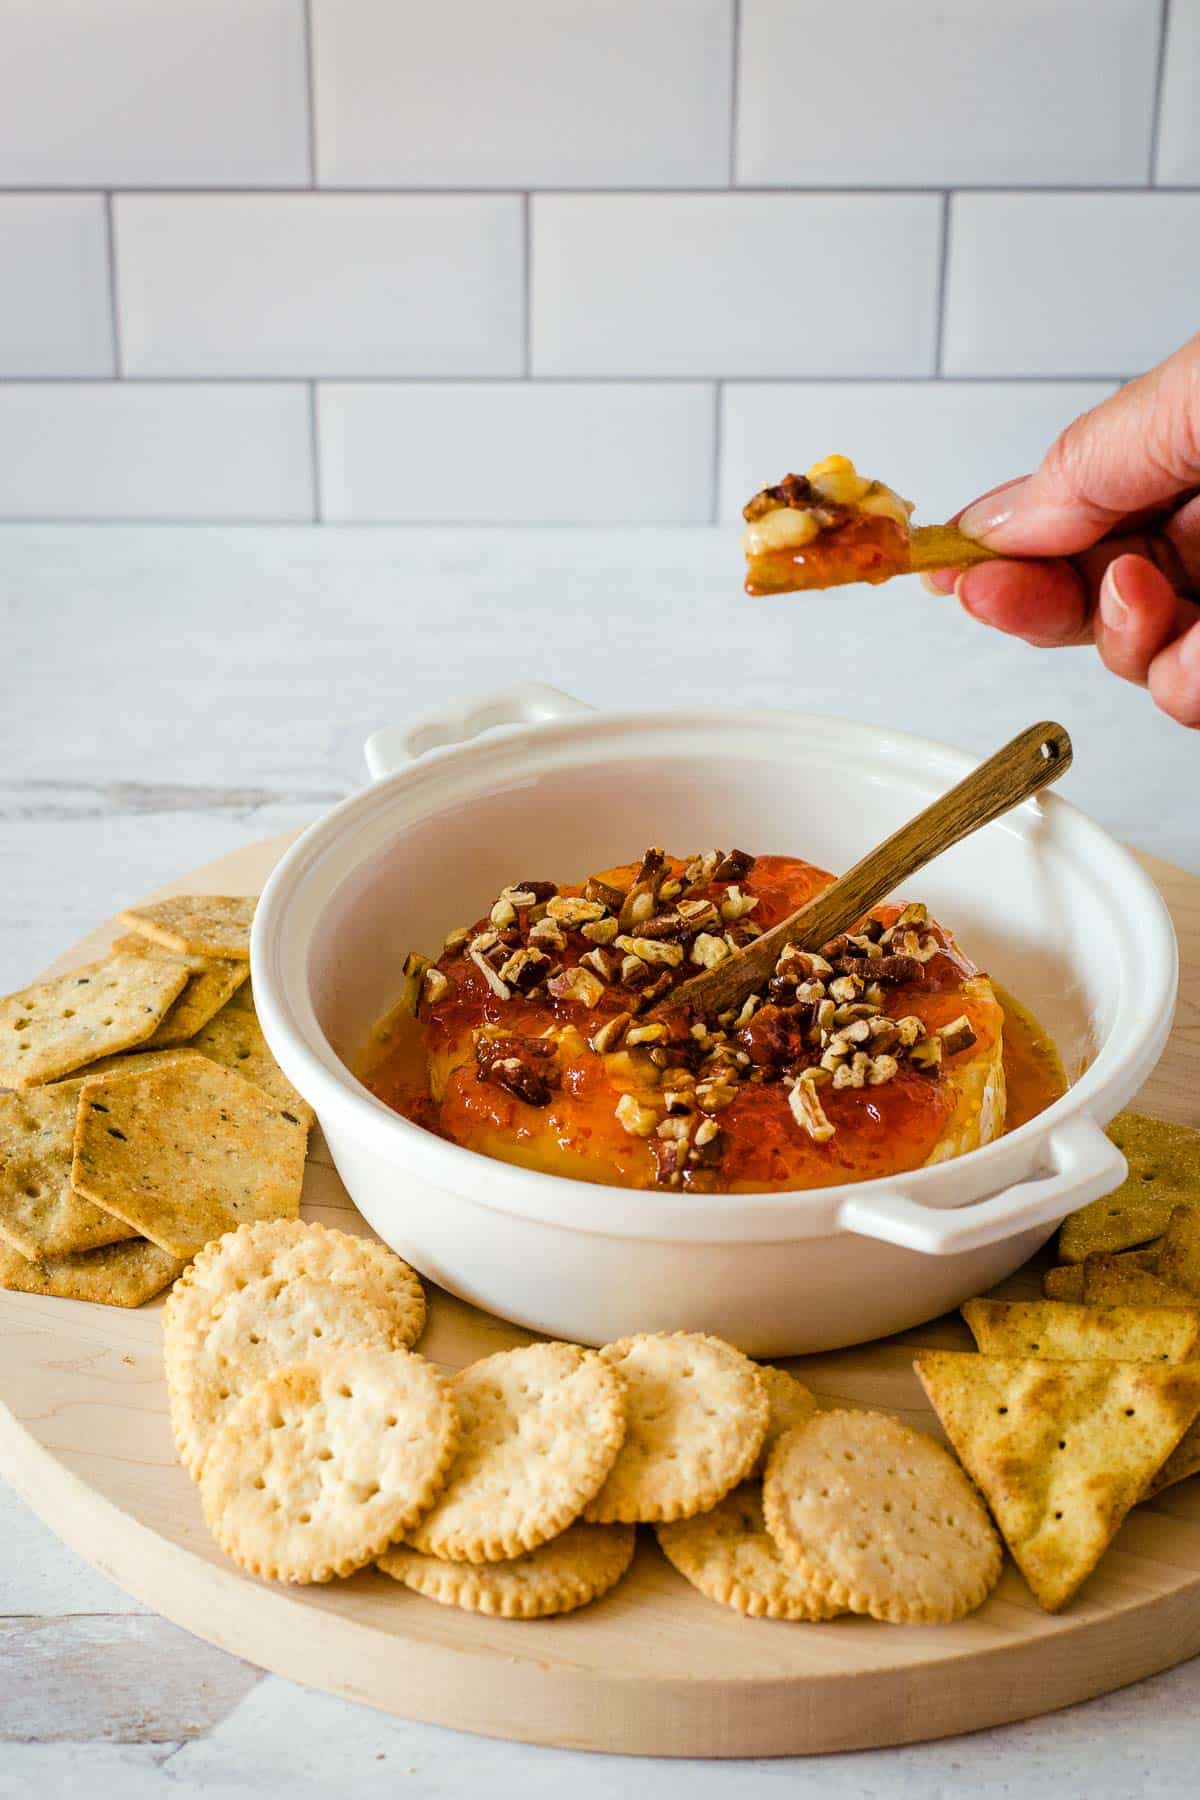 Hand dipping cracker into Baked brie with pepper jelly